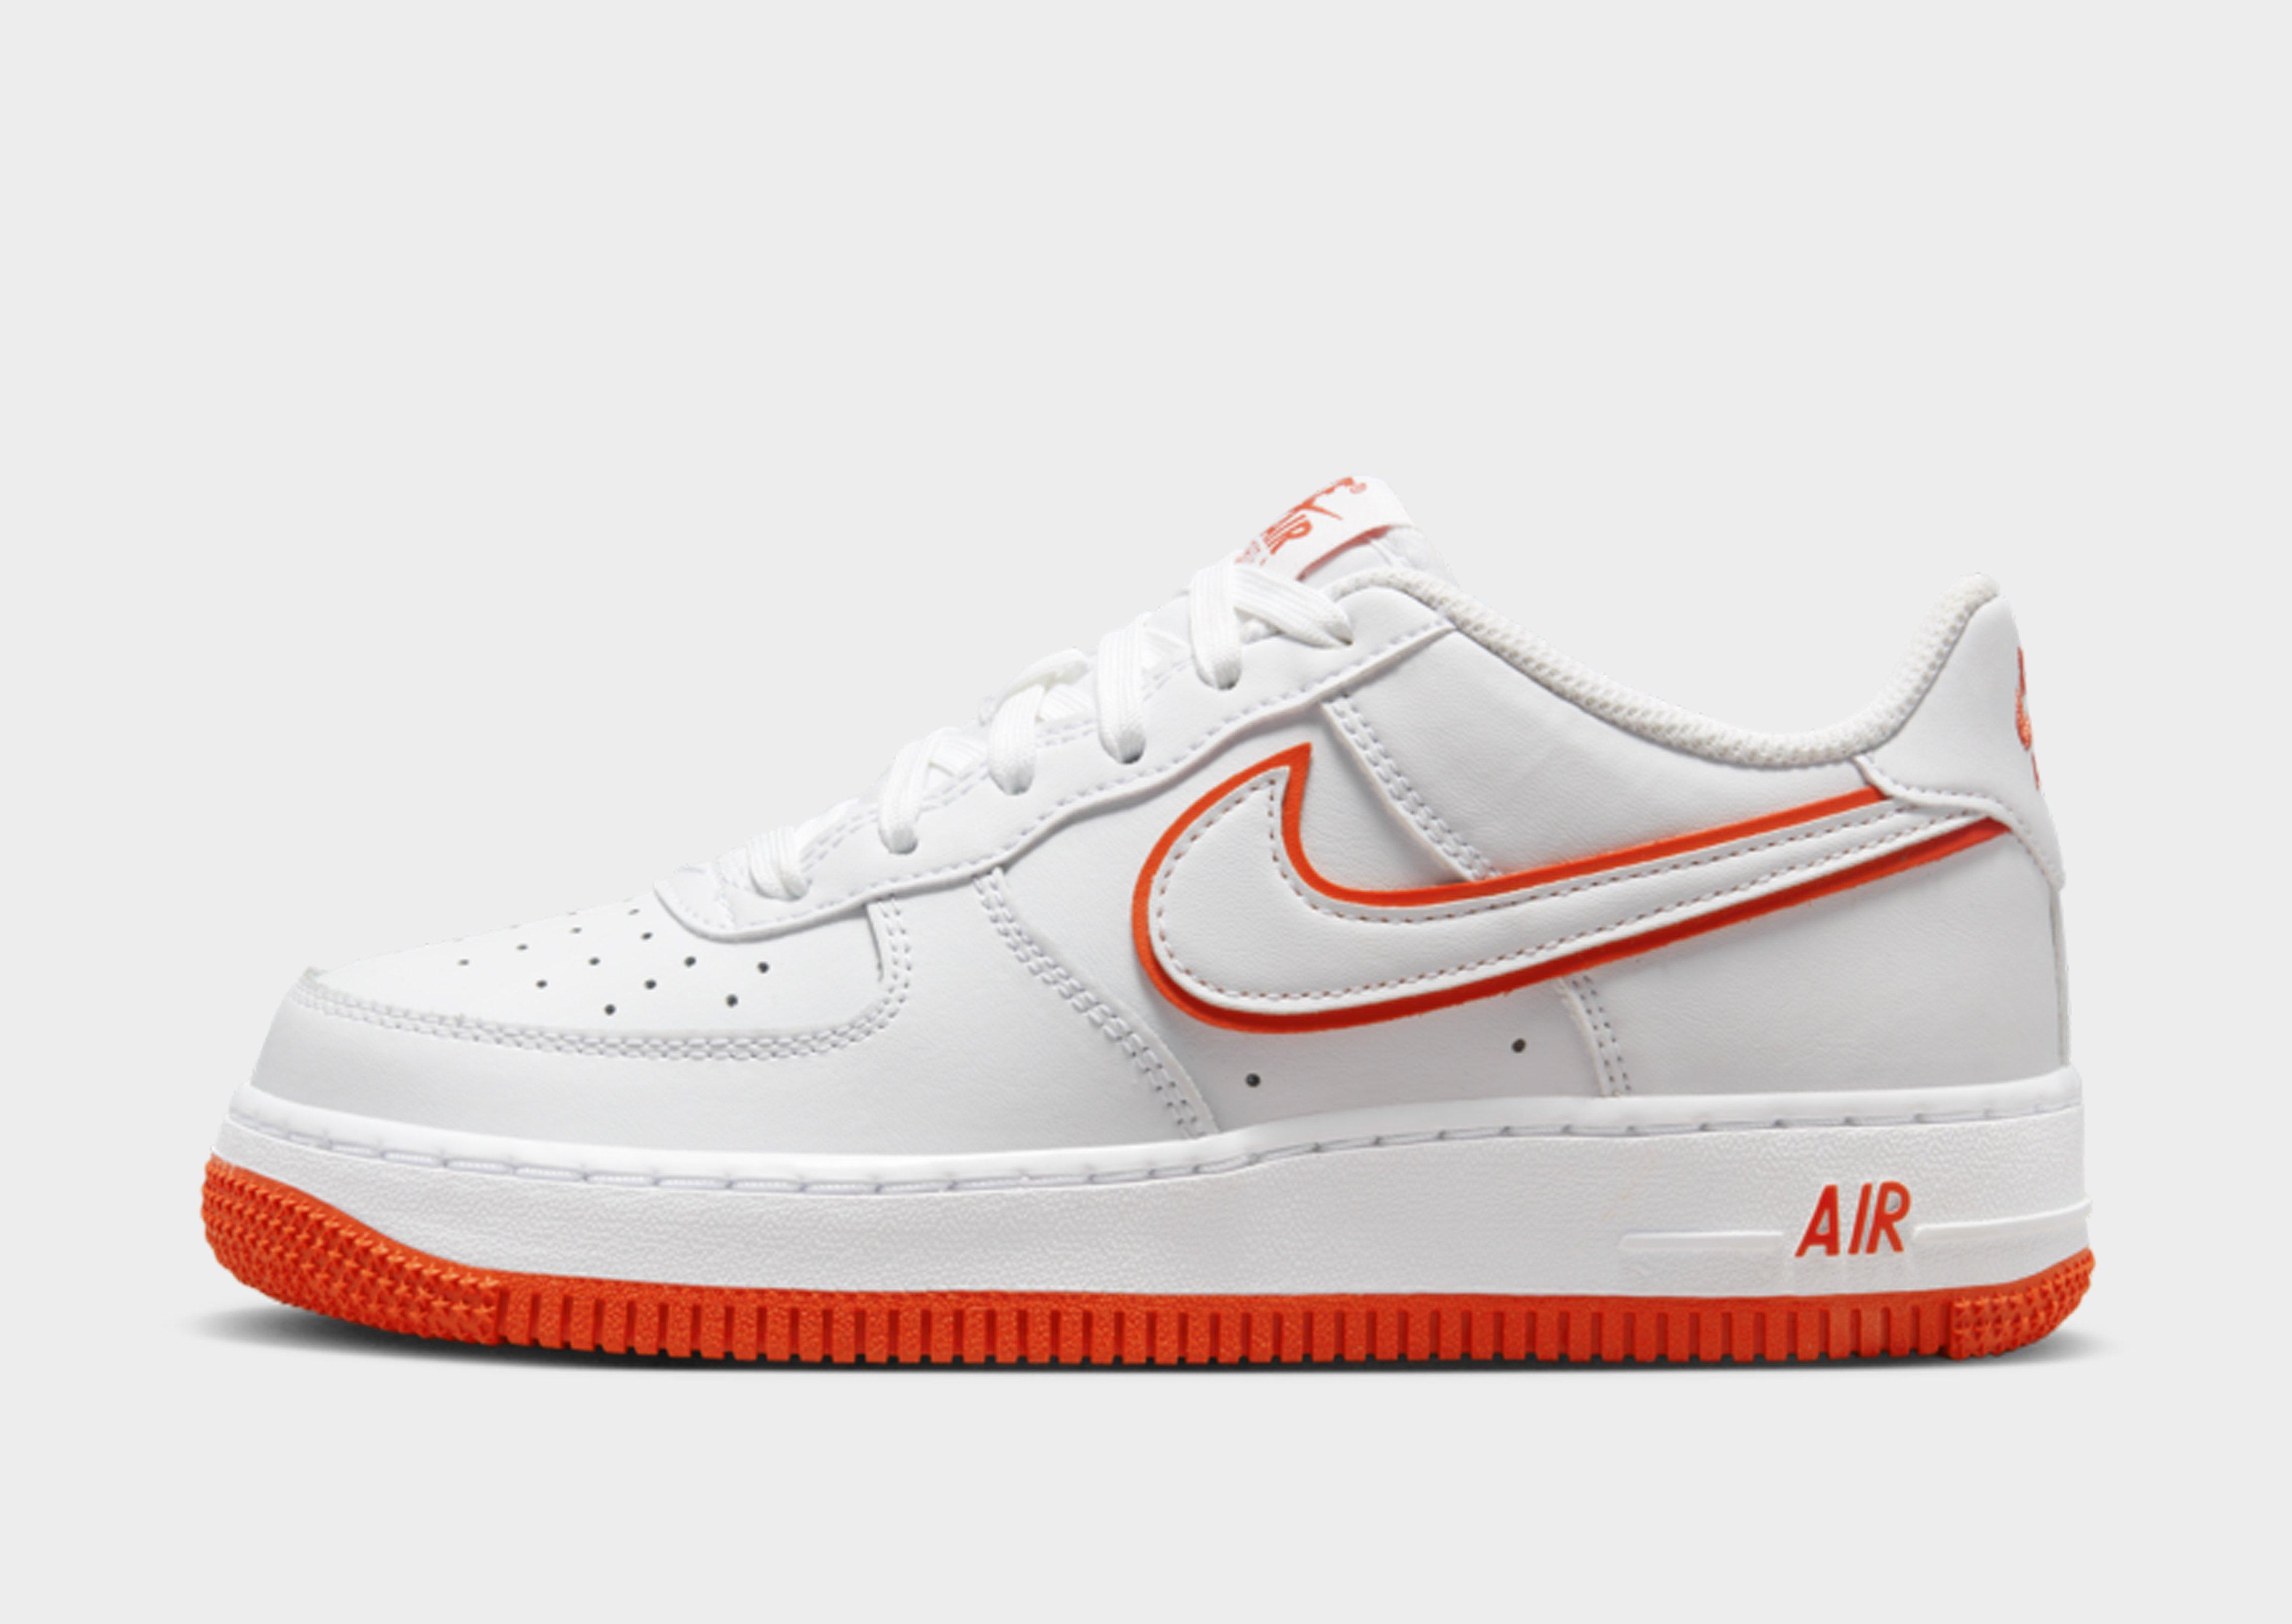 Men's Nike Picante Red Air Force 1 Now Available In Men's Sizing